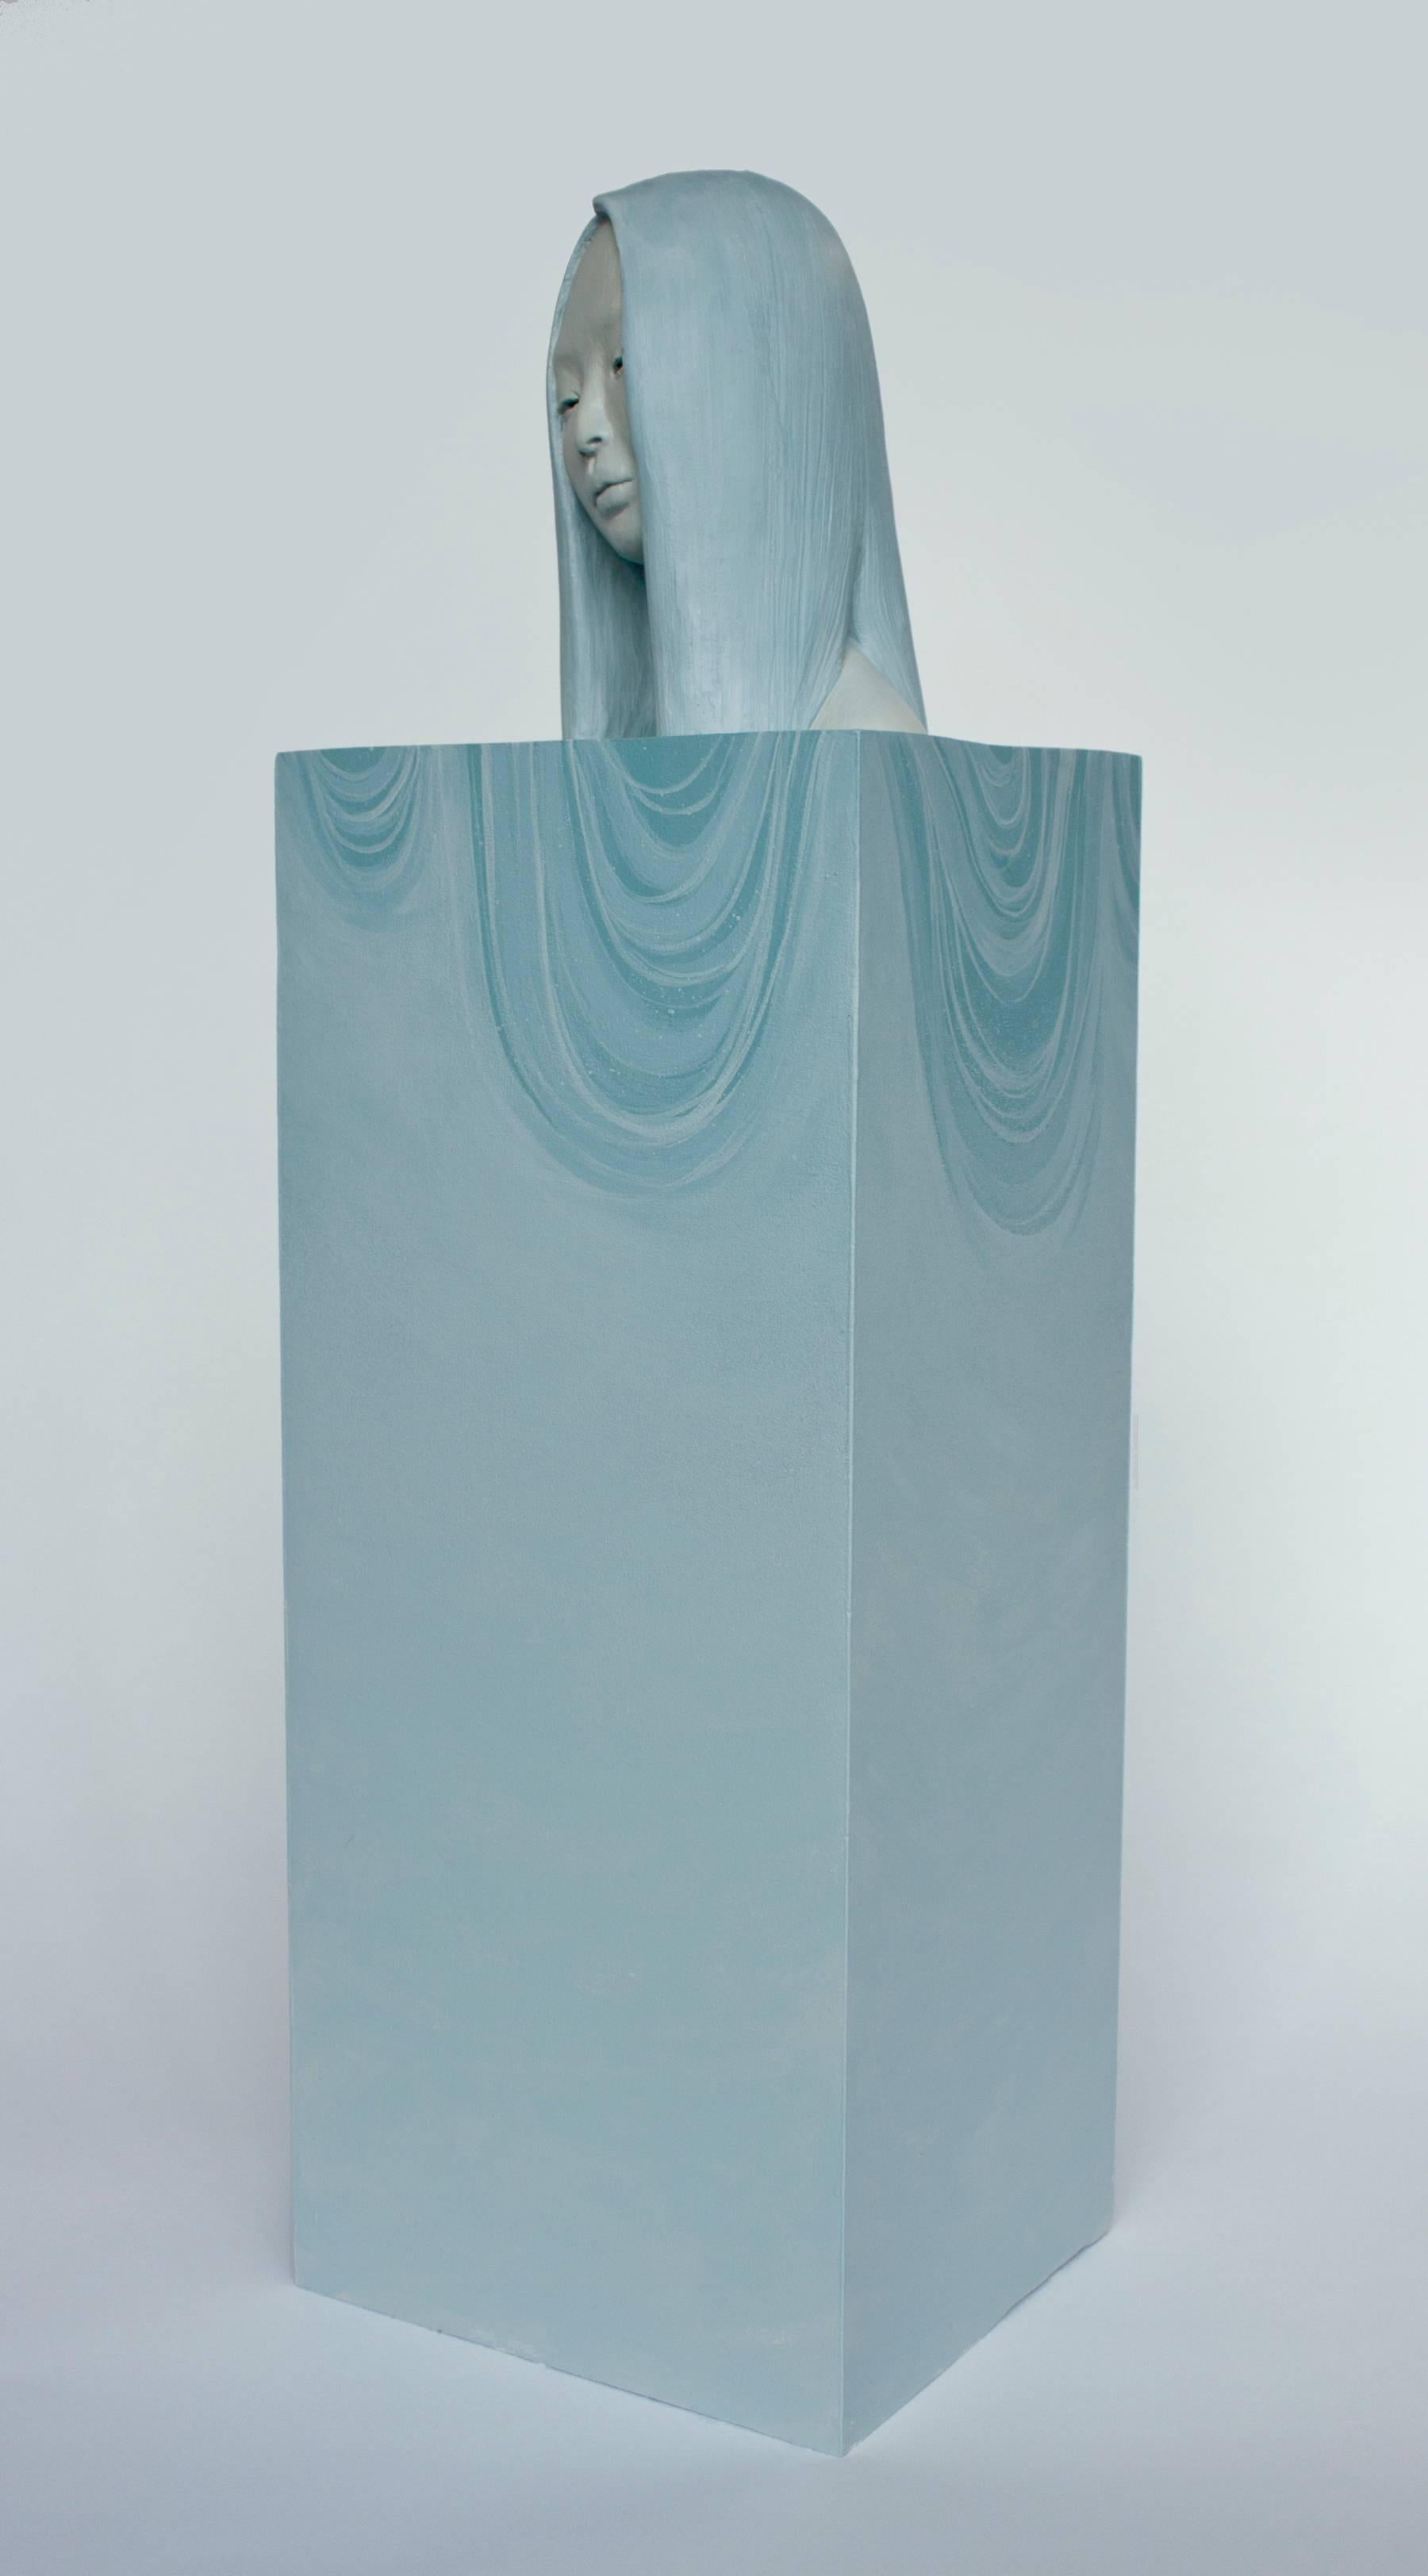 This blue, figurative sculpture titled 